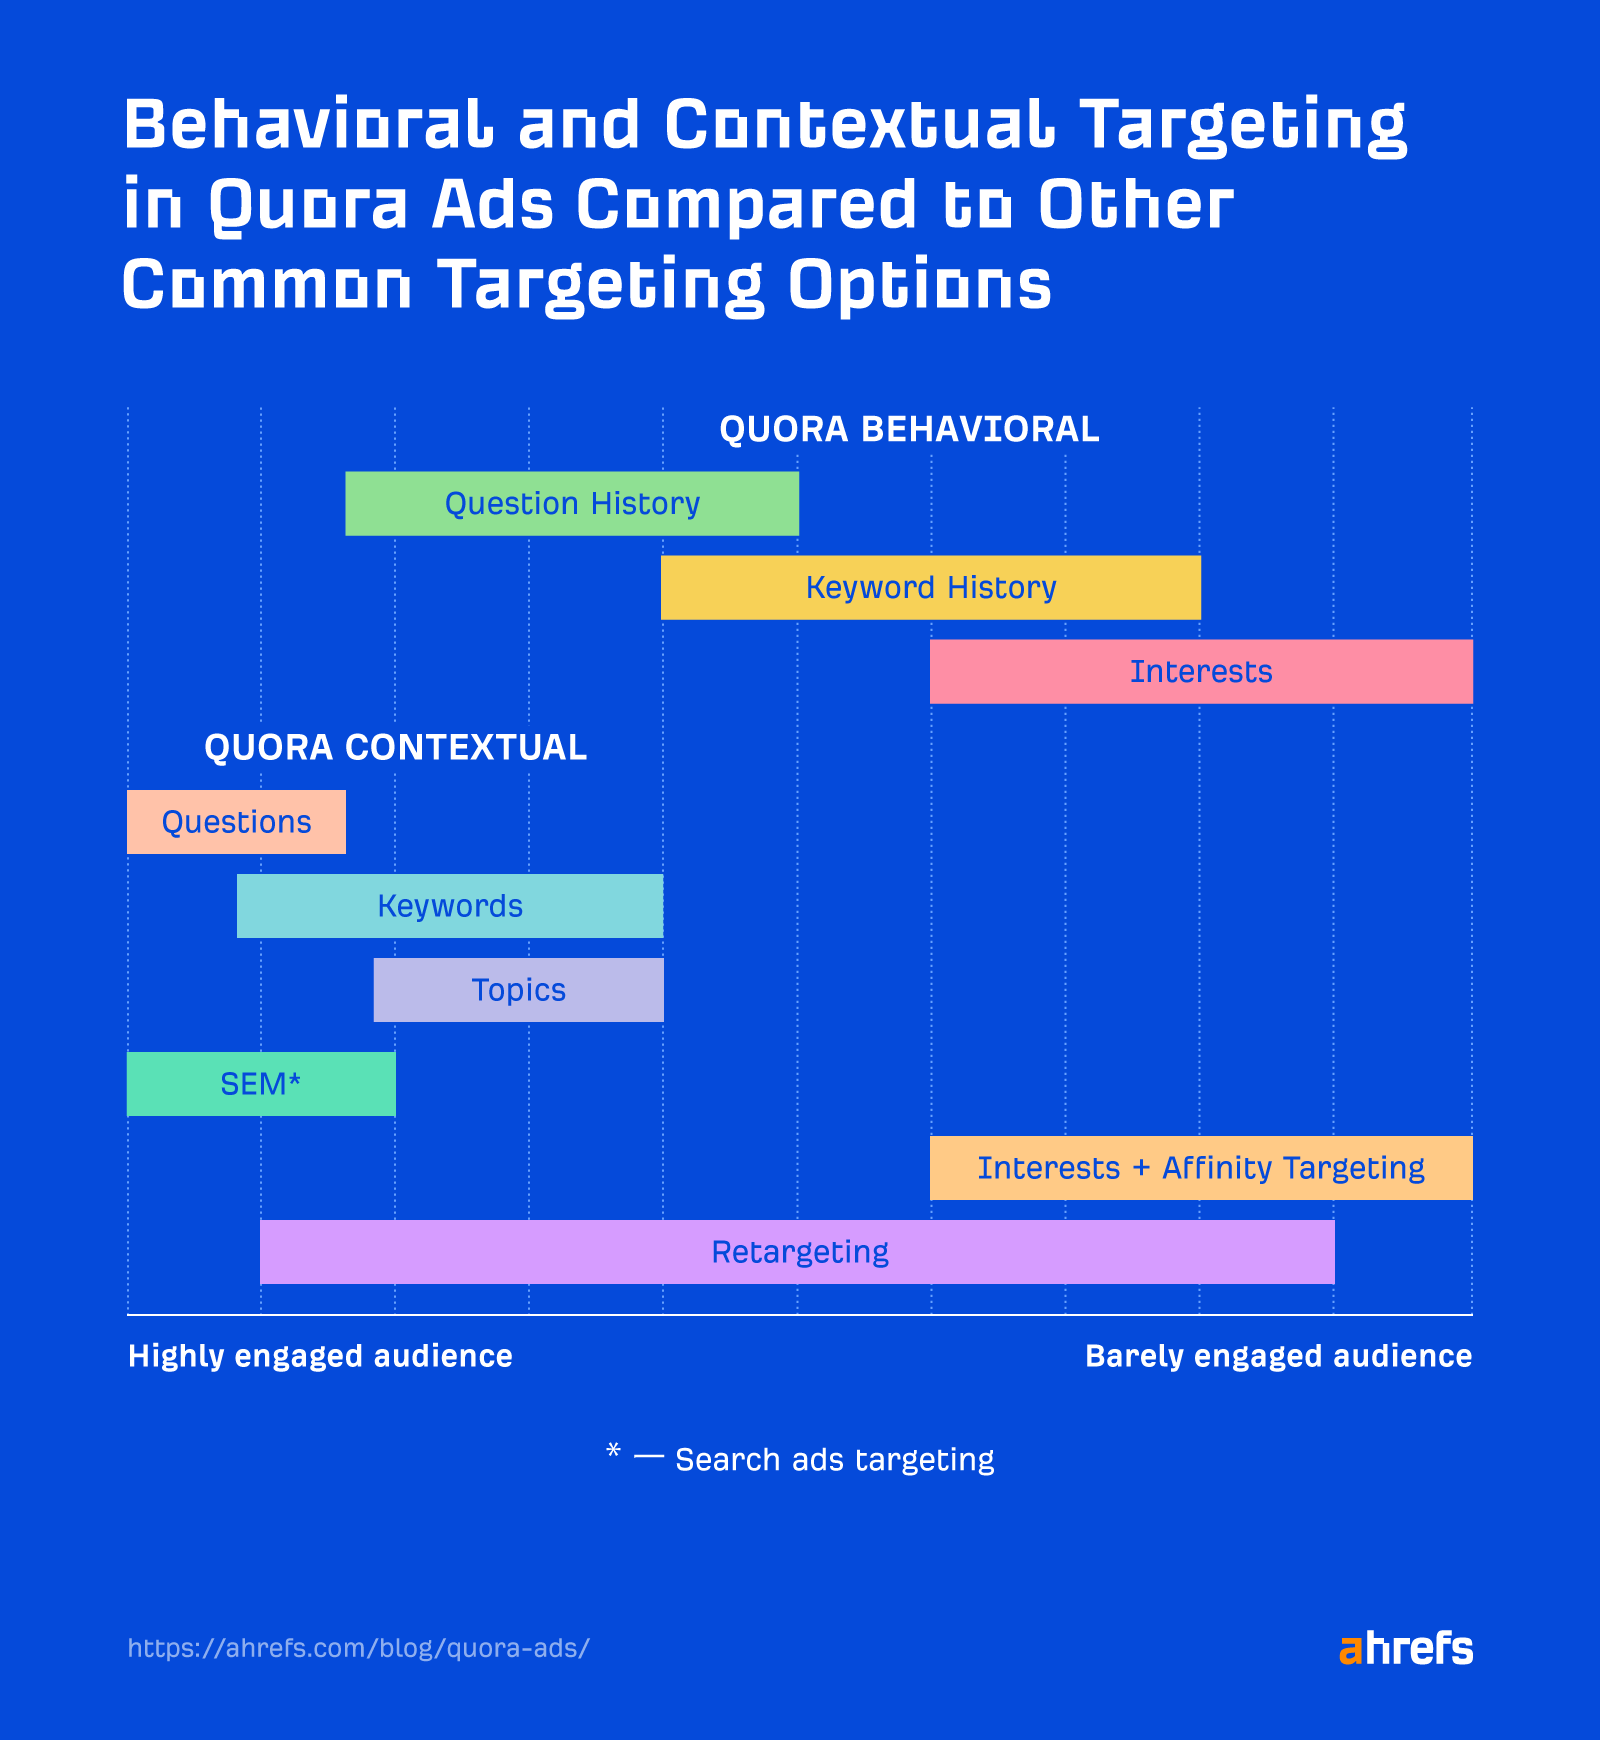 Behavioral and contextual targeting in Quora Ads compared to other common targeting options